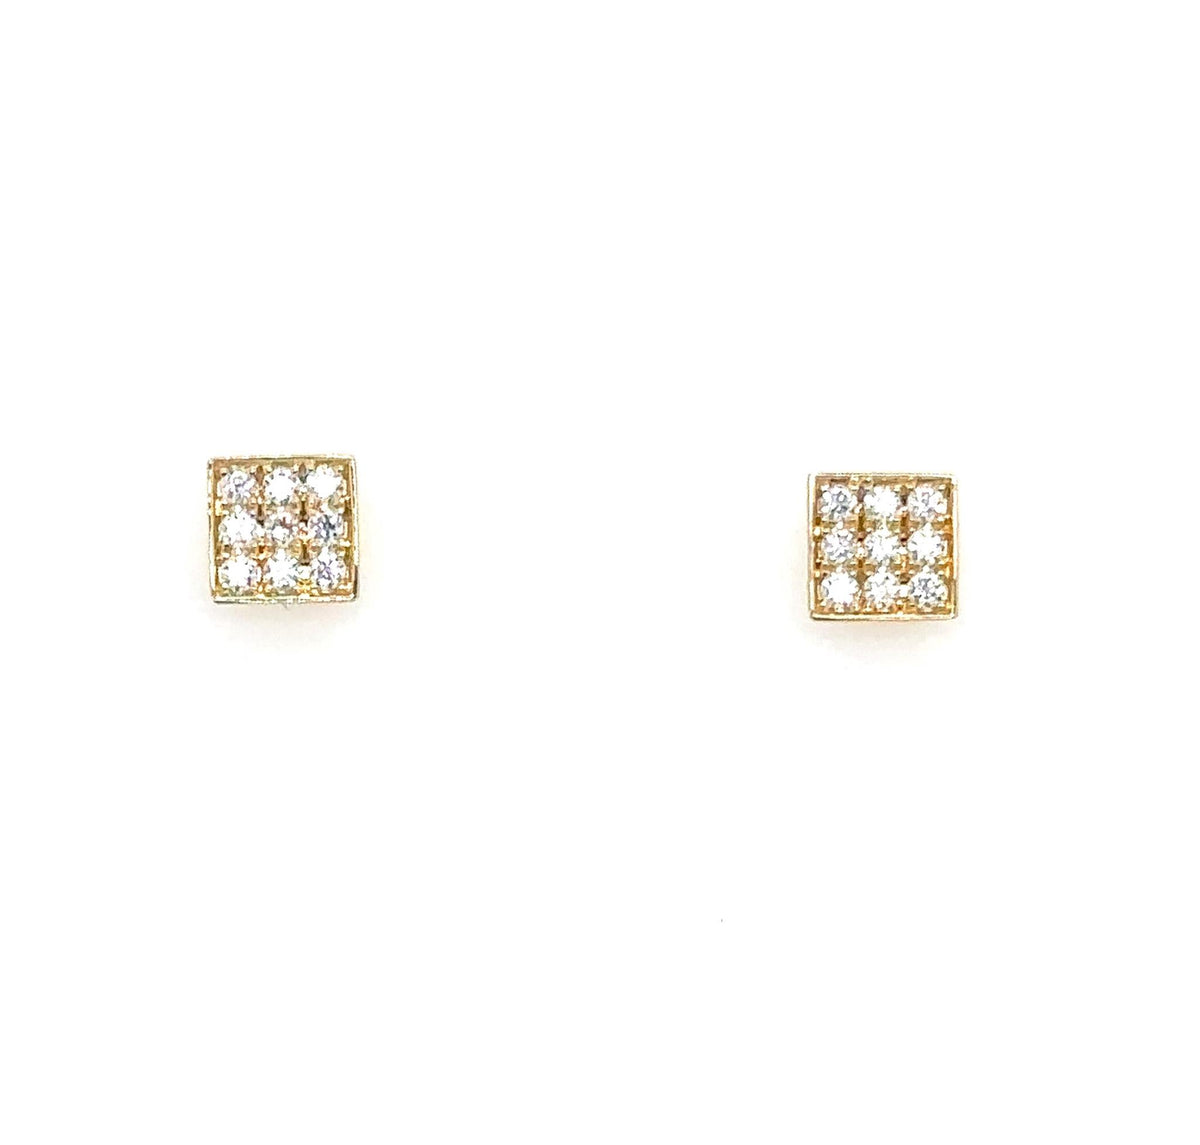 14Kt Yellow Gold Classic Stud Earrings 0.25cttw Natural Diamonds